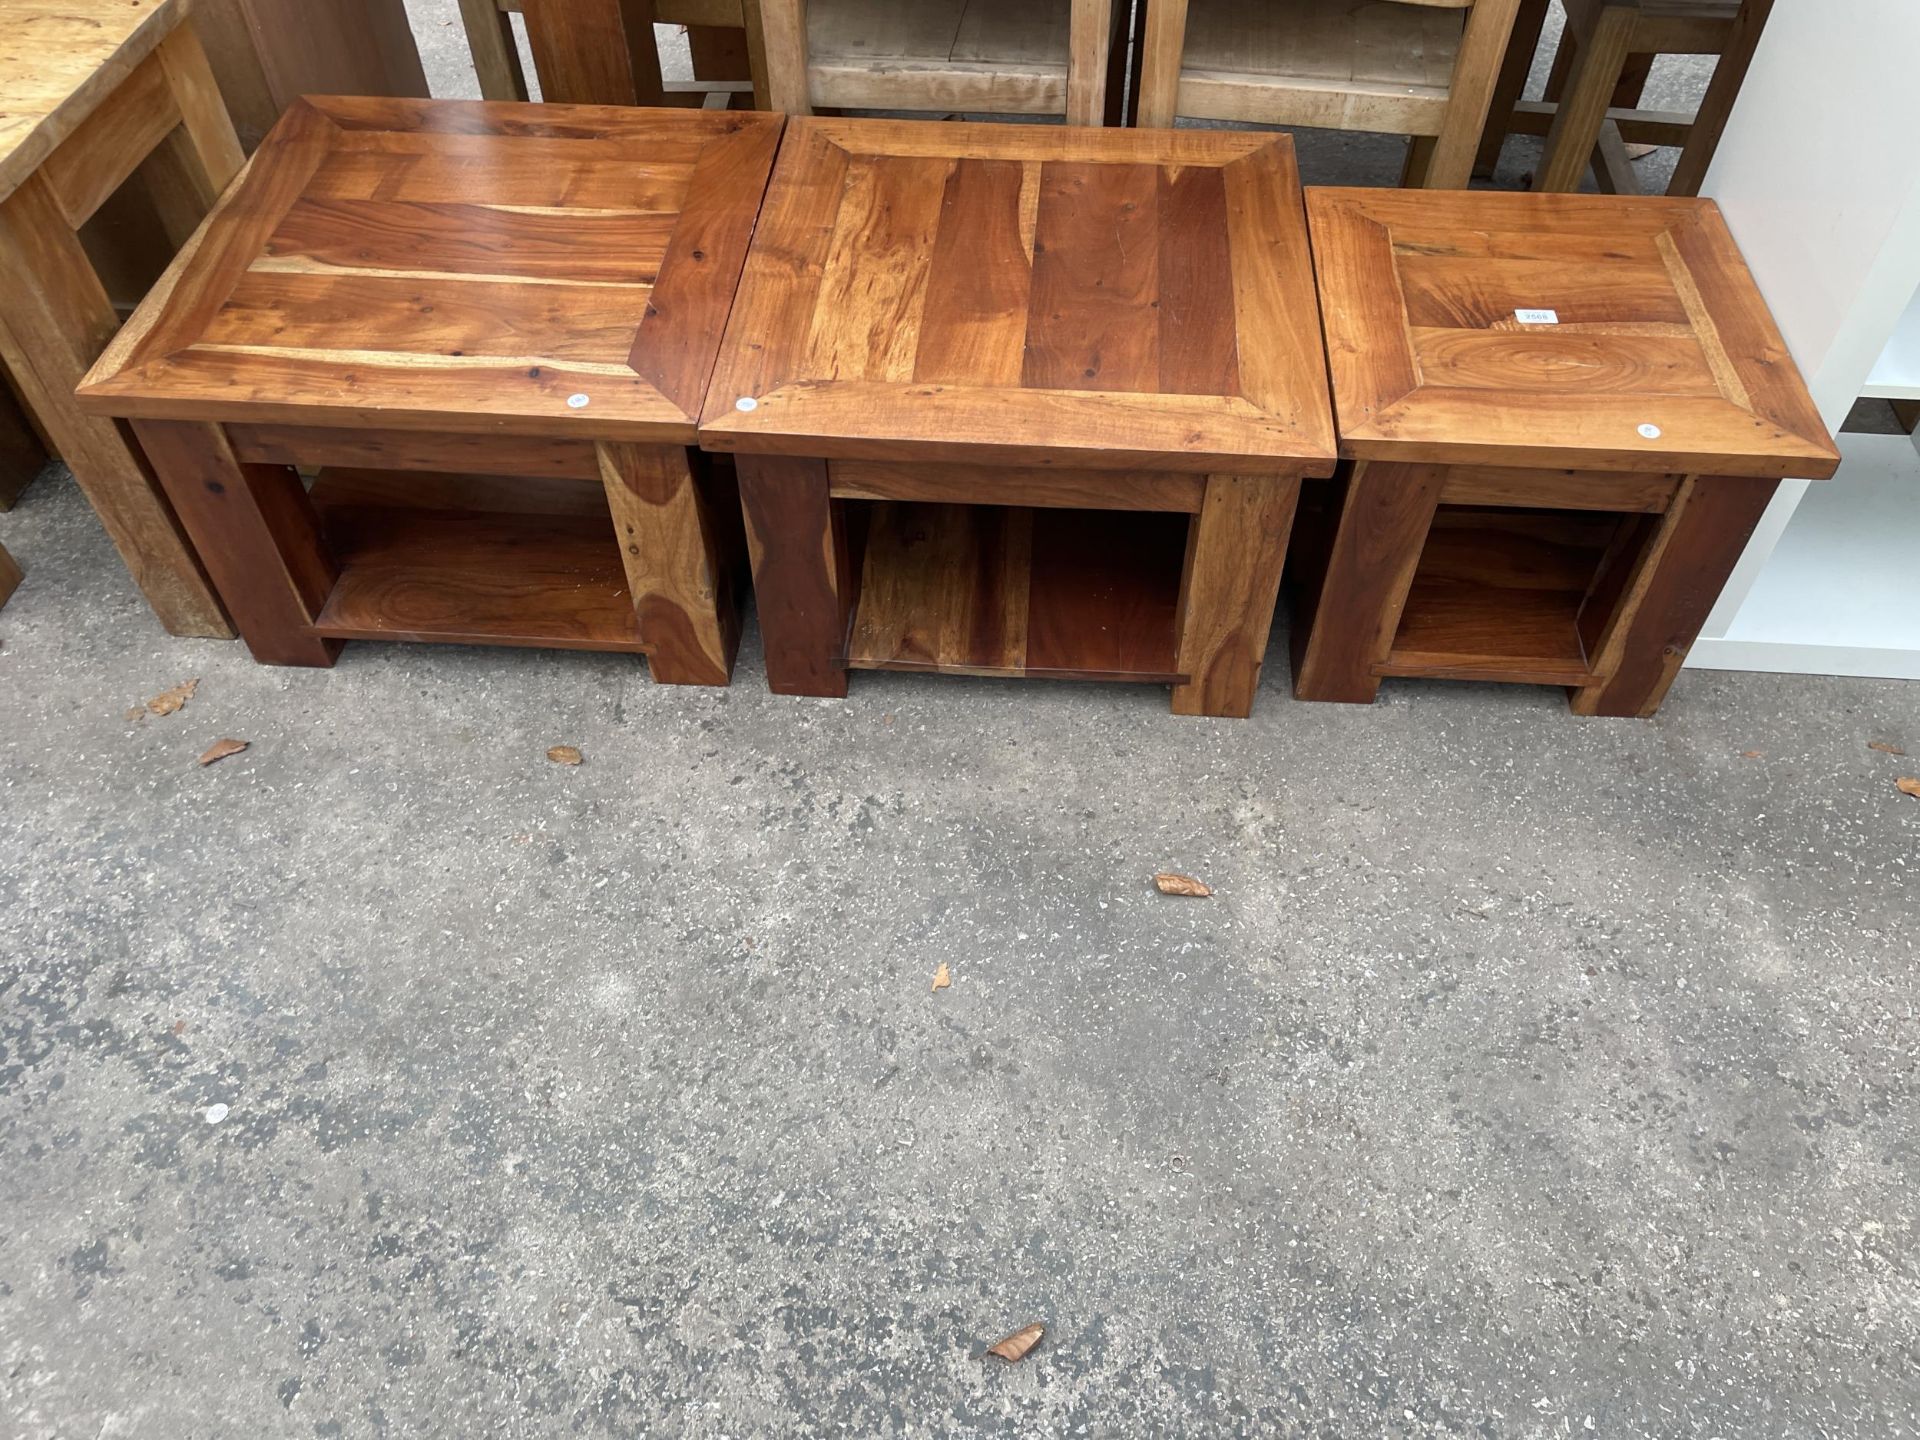 A PAIR OF HARDWOOD LAMP TABLES, 24" SQUARE EACH AND A SMALLER TABLE 18" SQUARE